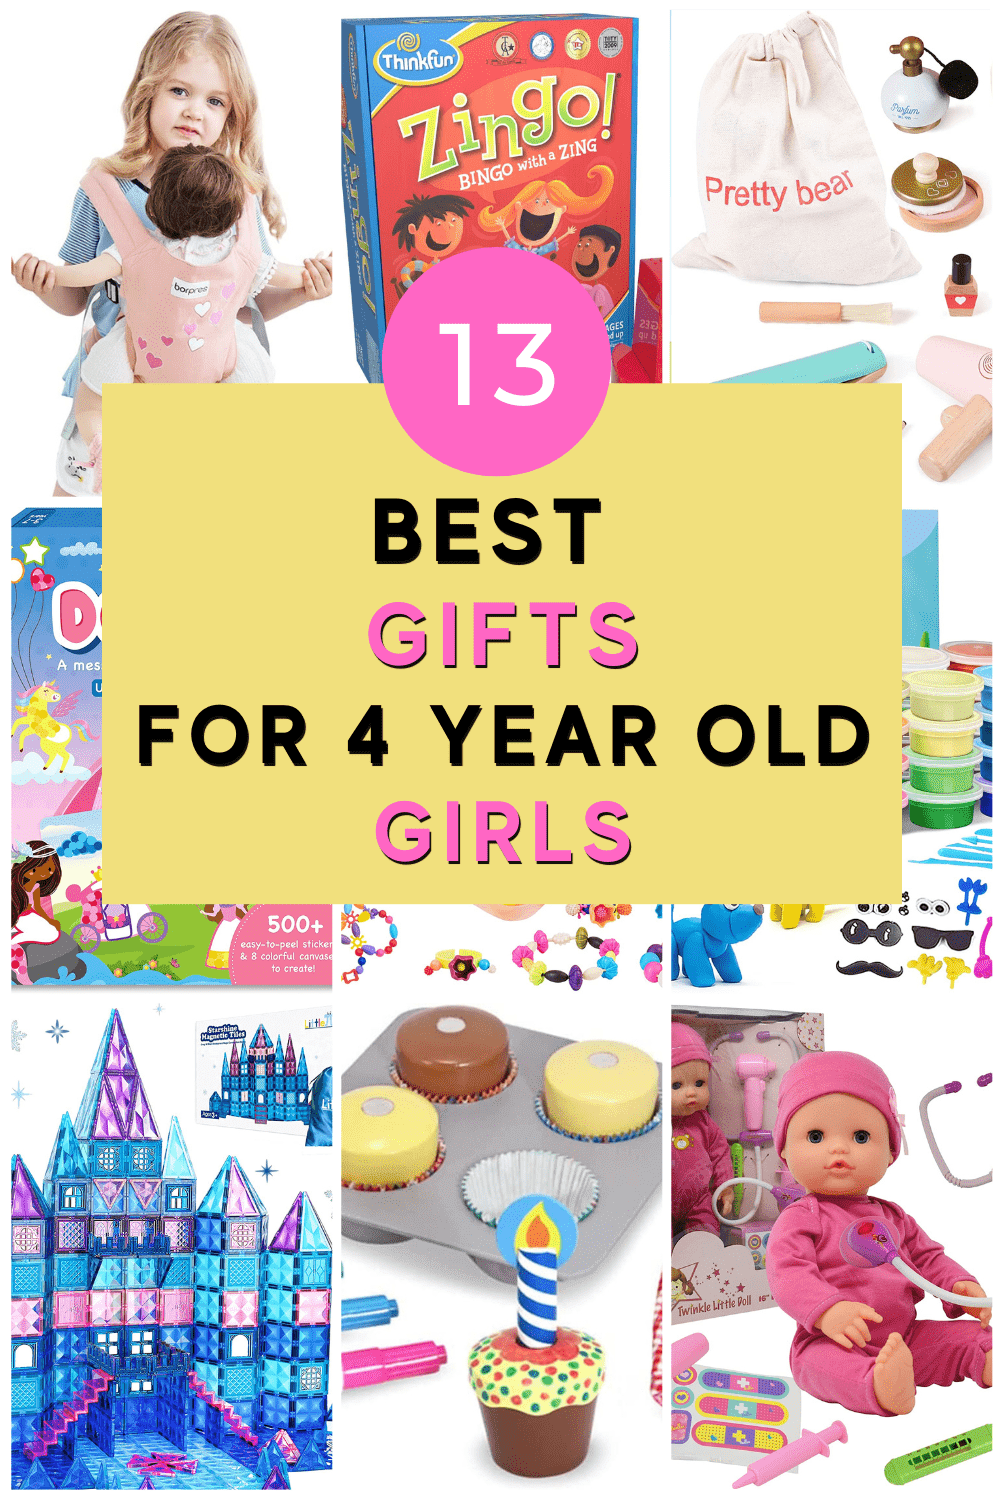 4 Year Old Girl Gift Guide From a 4 Year Old Herself! - ali-ish